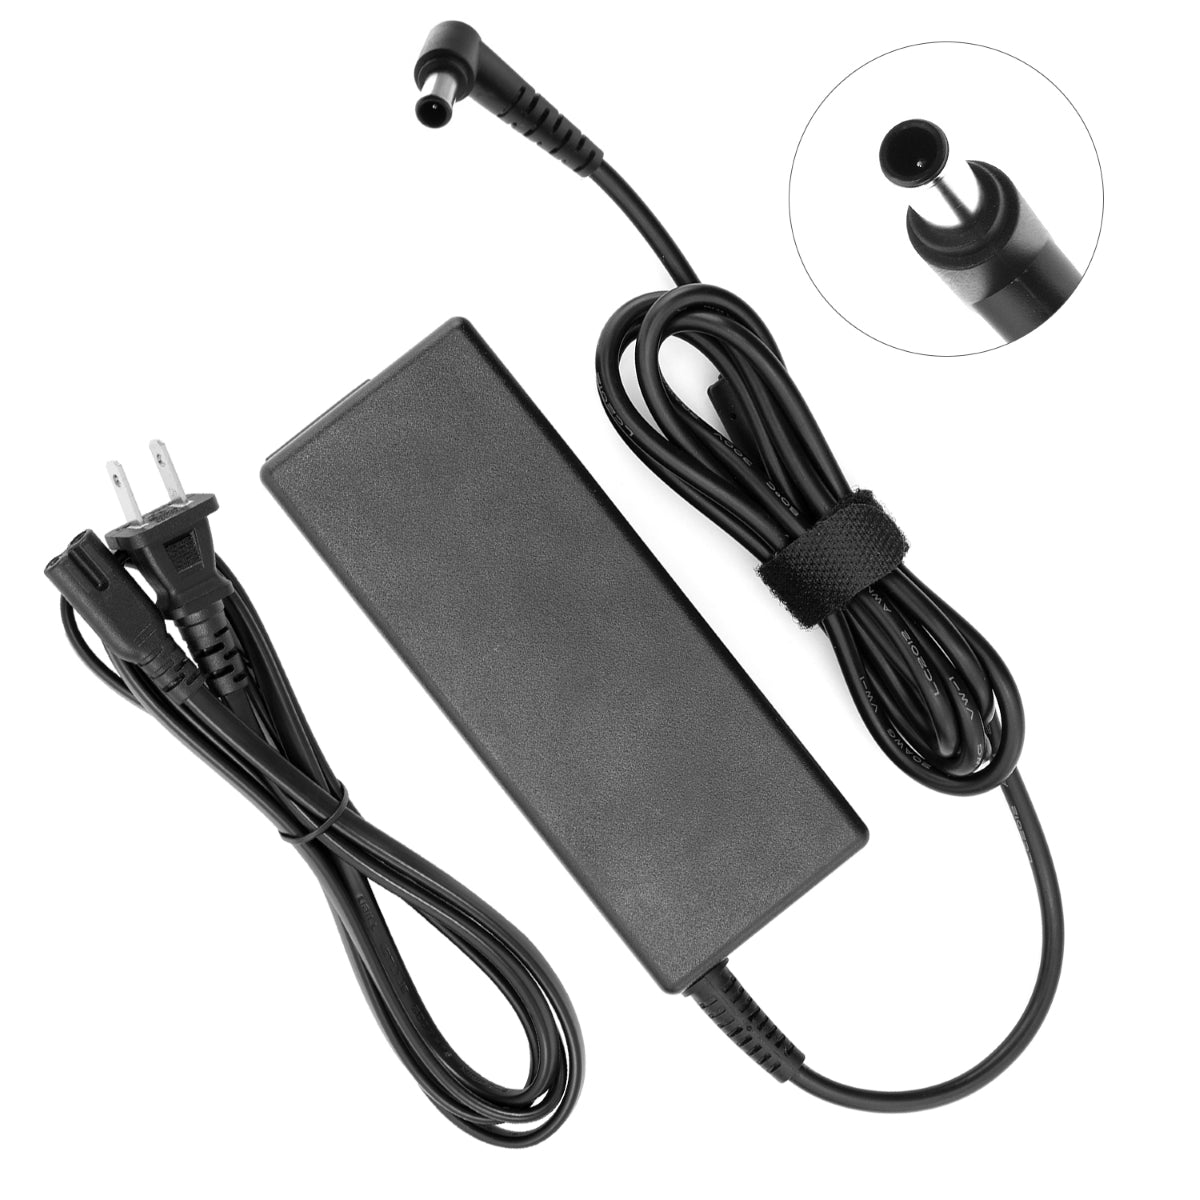 AC Adapter Power Supply for Samsung C27F396FHN Monitor